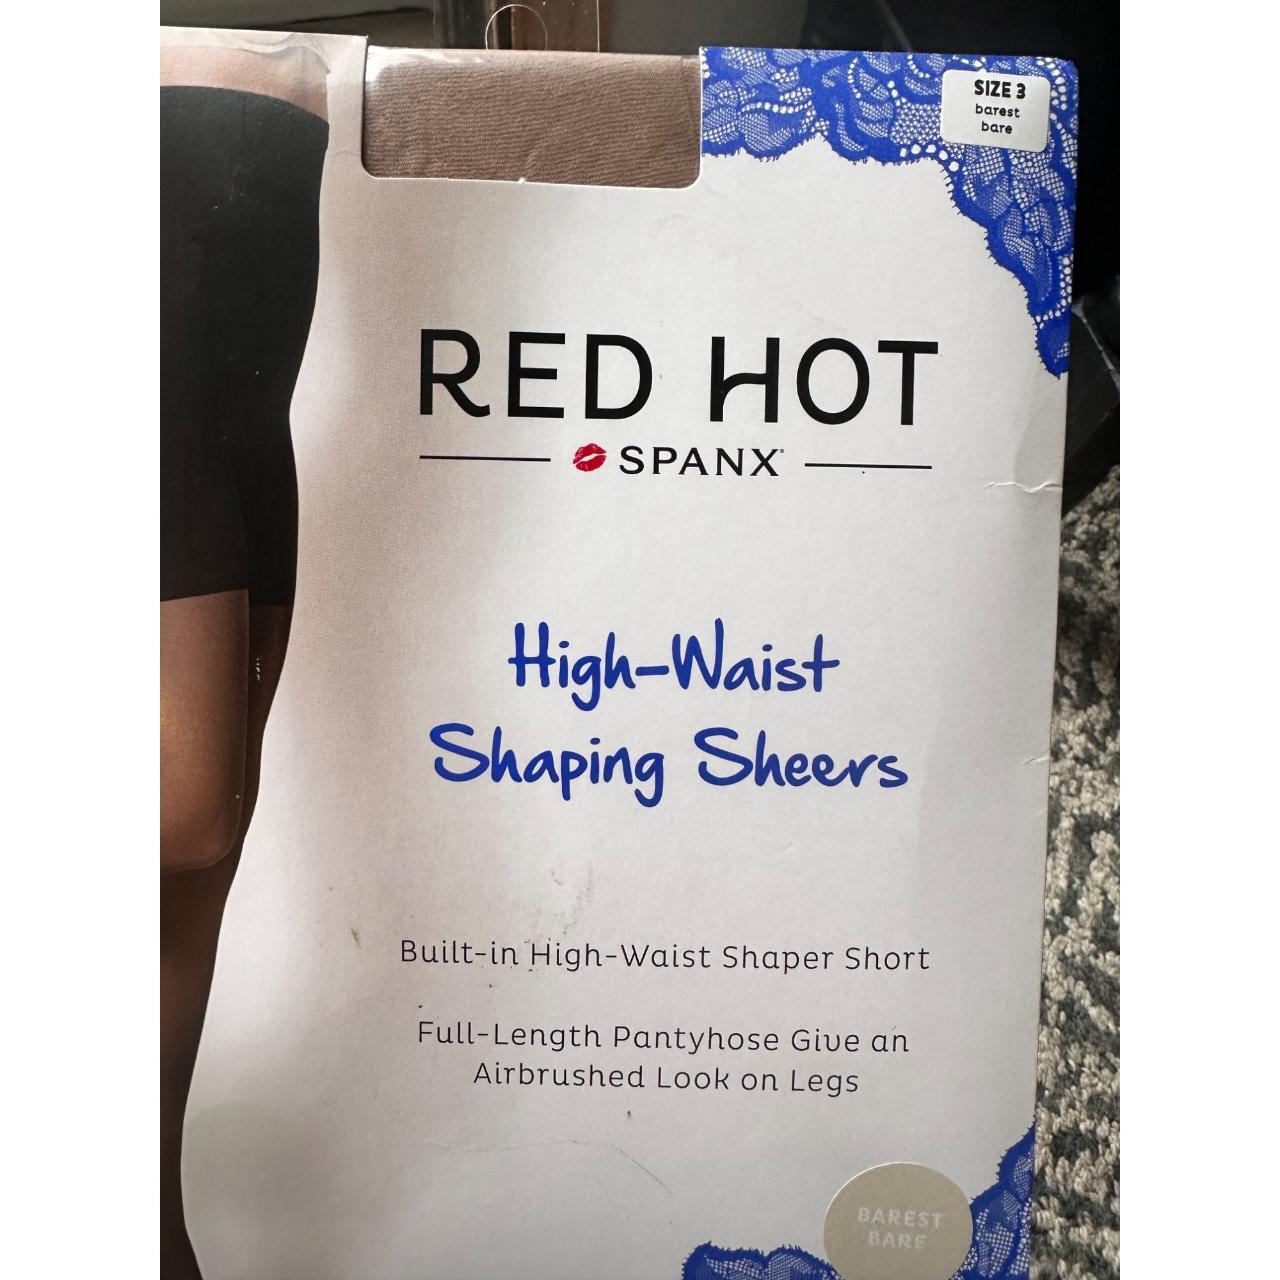 Red Hot by Spanx High-Waist Shaping Sheers